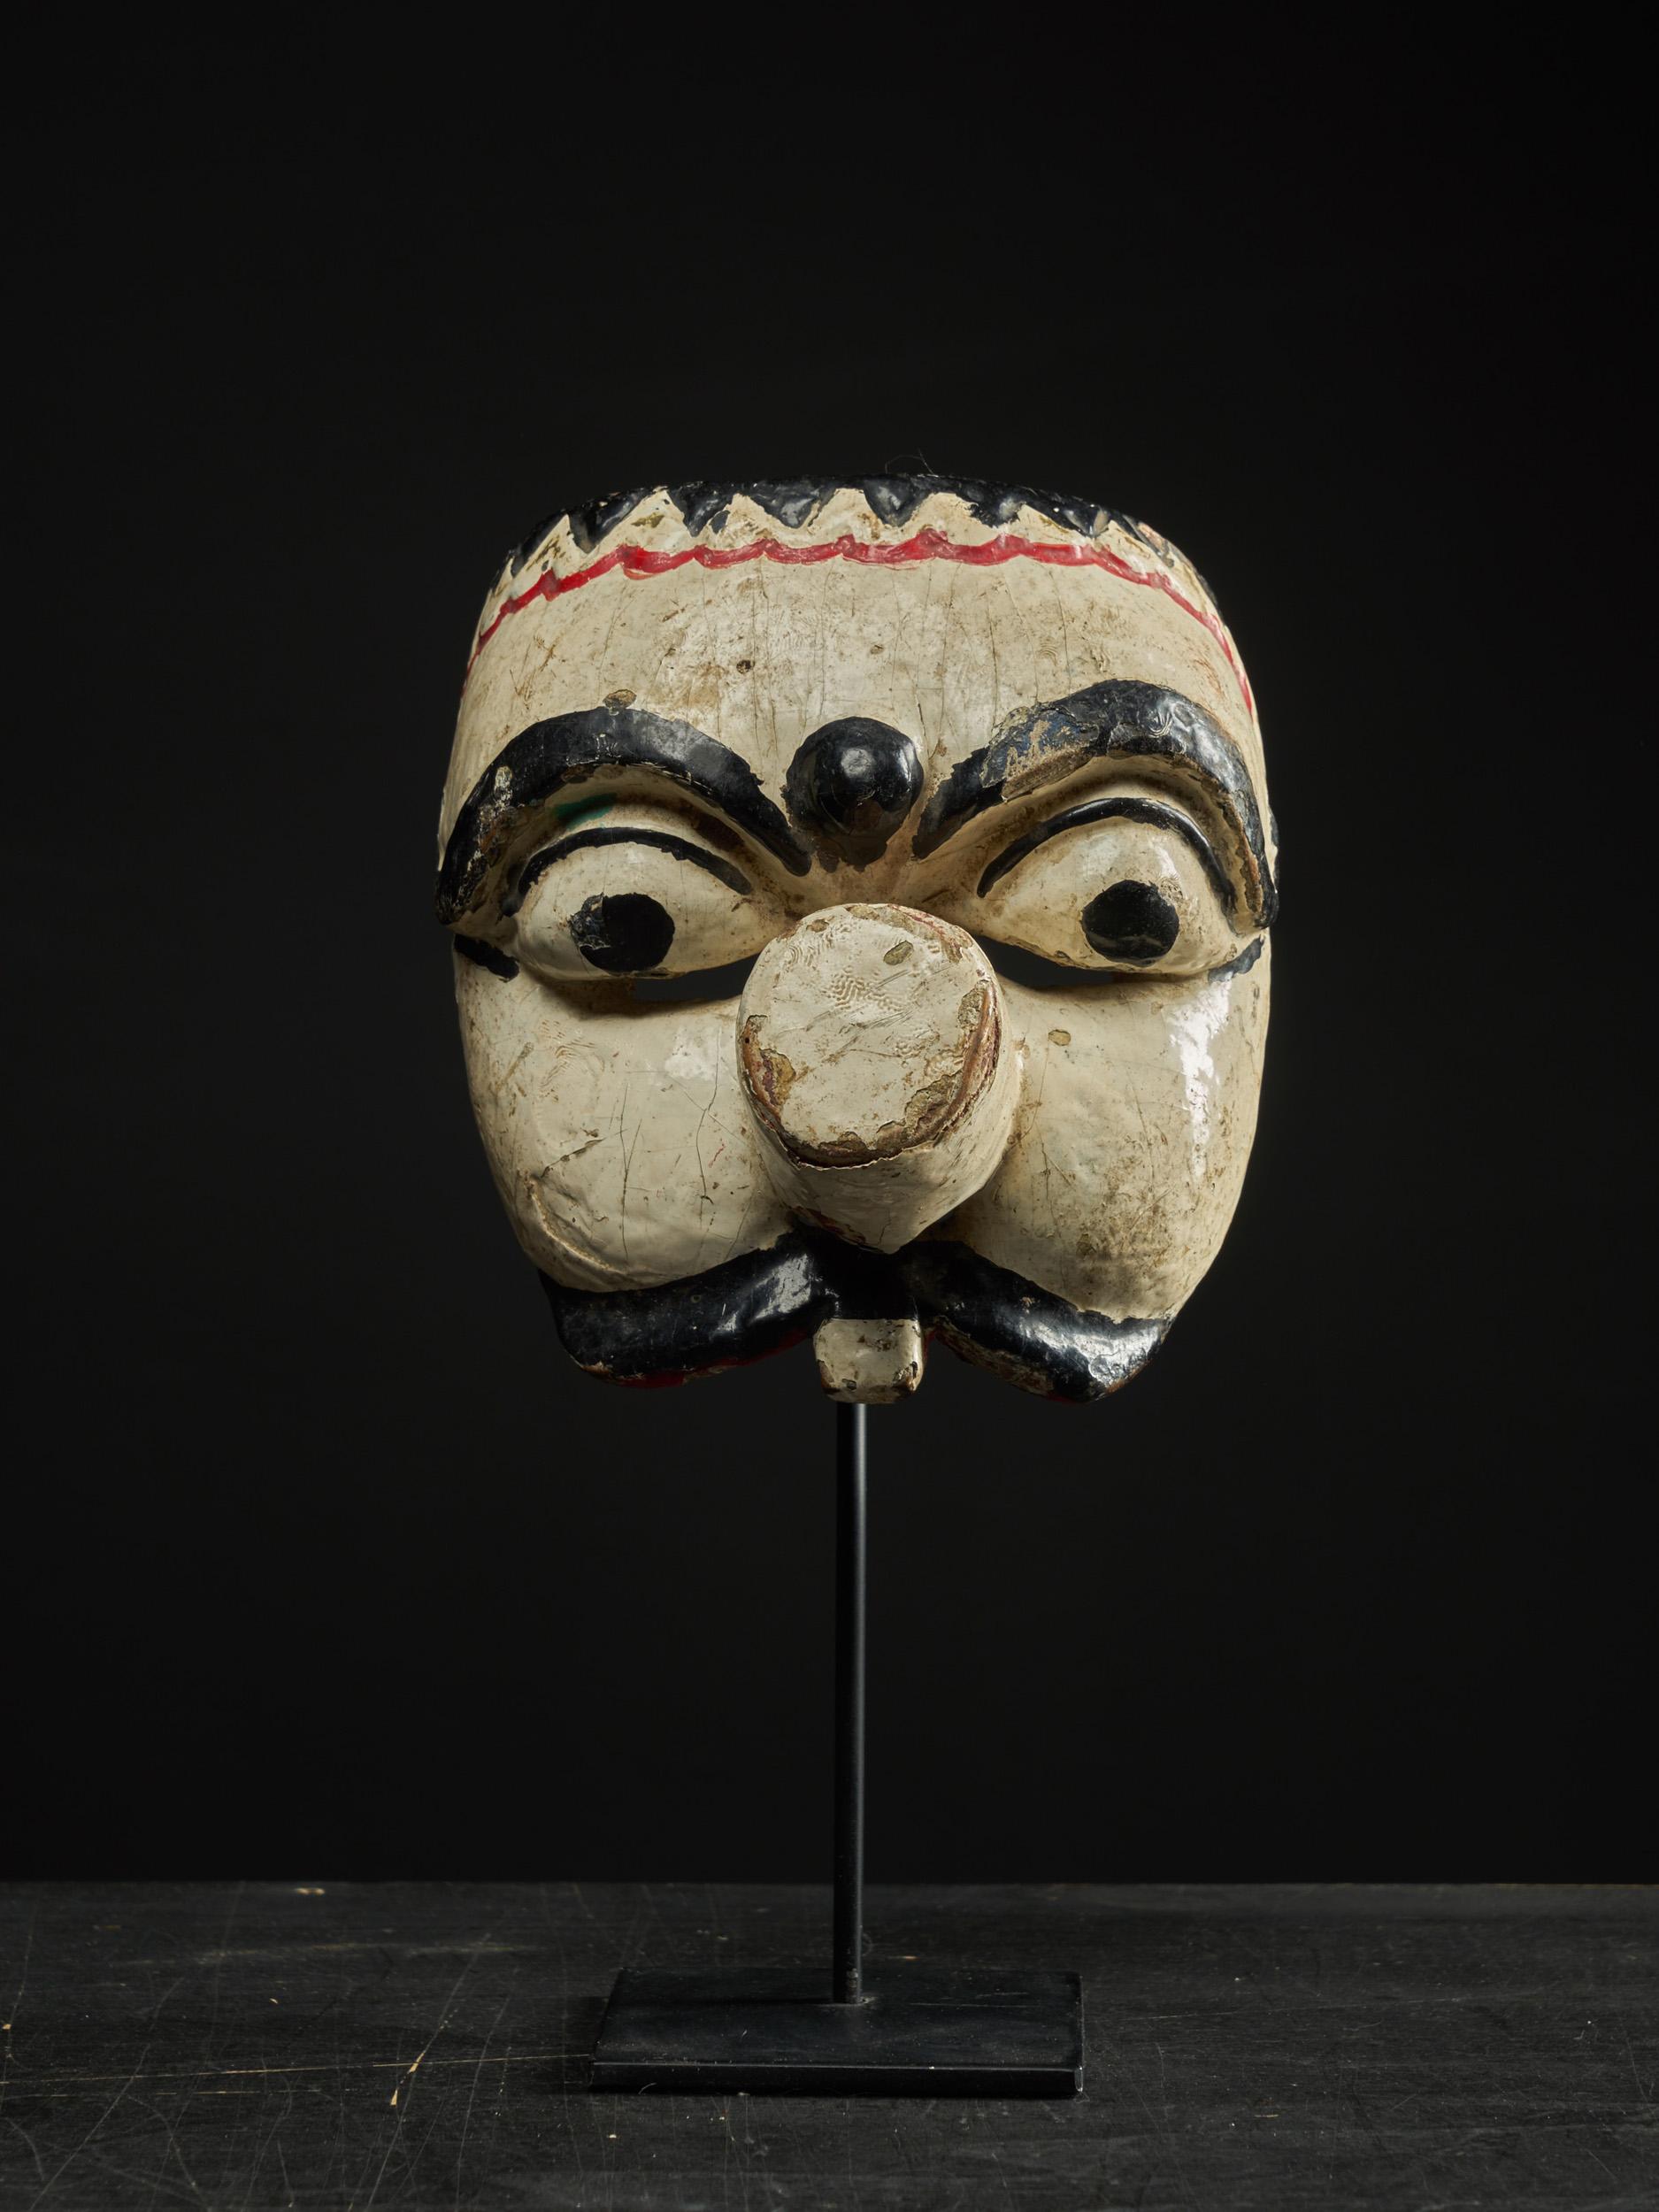 The mask is an example of traditional theater masks found in the cultures of Java, Indonesia. The face is carved out of wood and painted with colors that represent the status of the character. In this case, the mask is almost all white, which is a